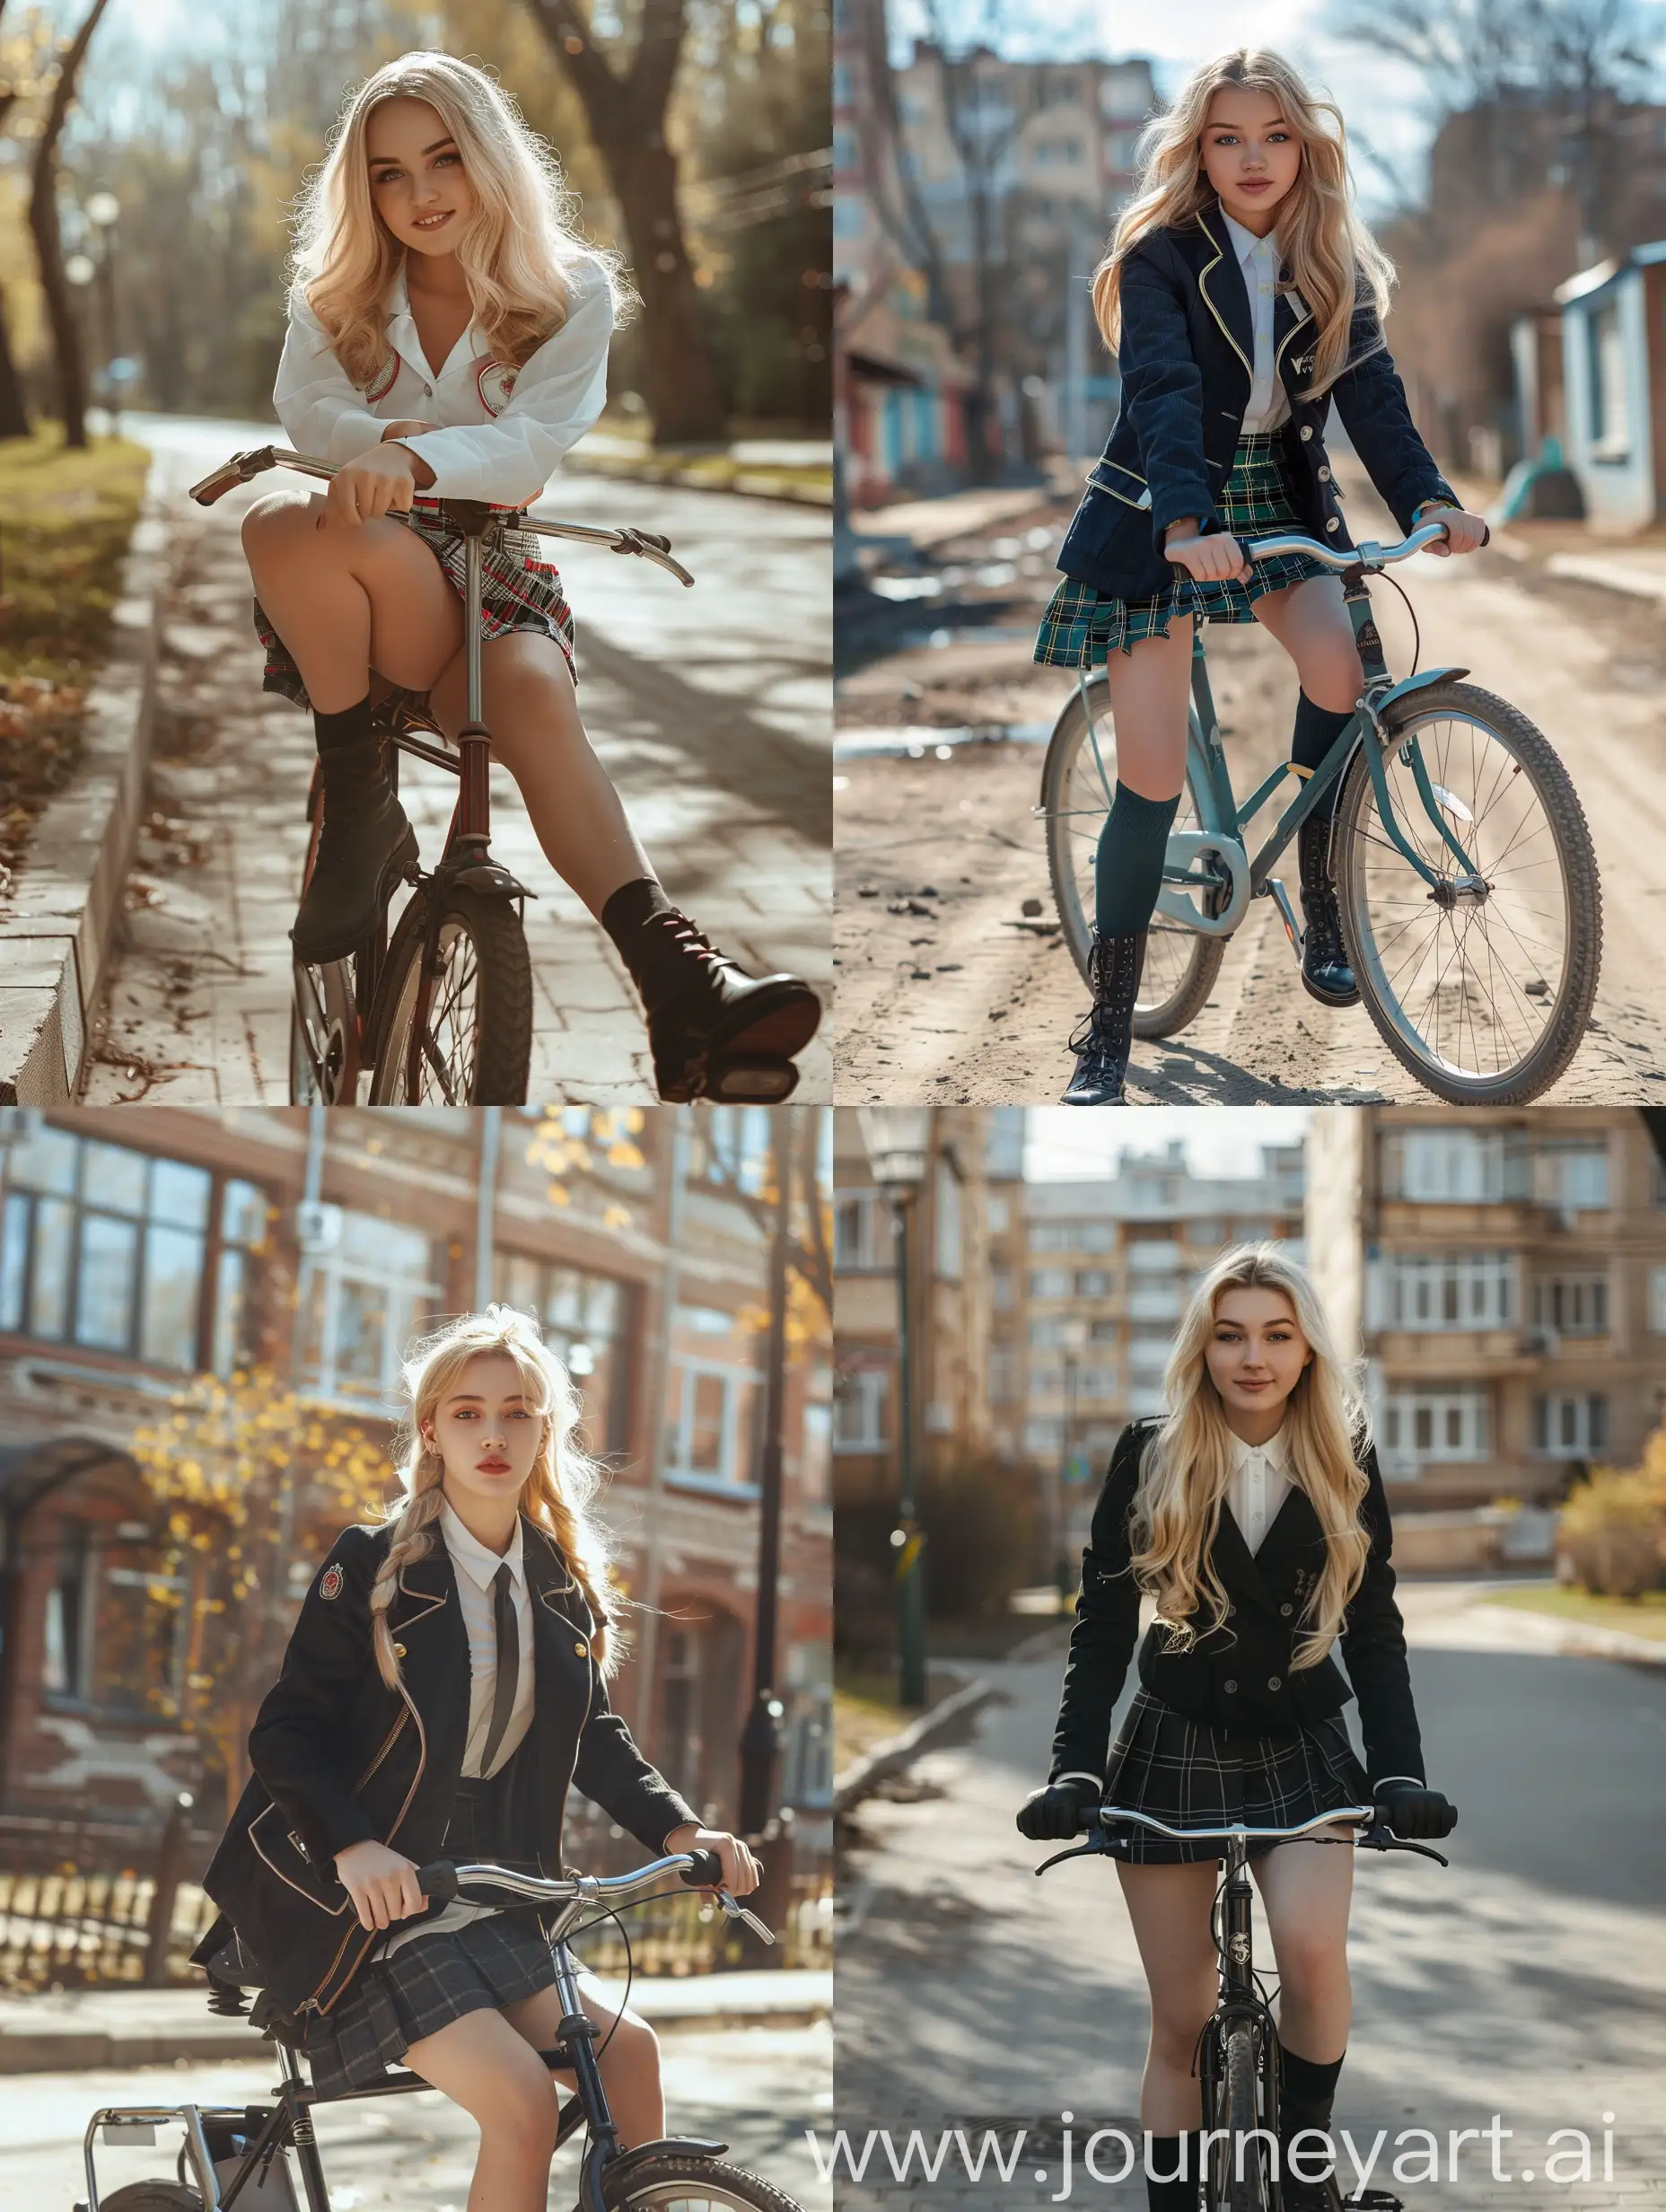 1 ukrain woman, real photo, portrait, photography, ,  , 22 years old, blonde hair, school uniform, down view, natural, , sunny day, ,  on bicycle, fat legs, no , front view, smiling , black boots